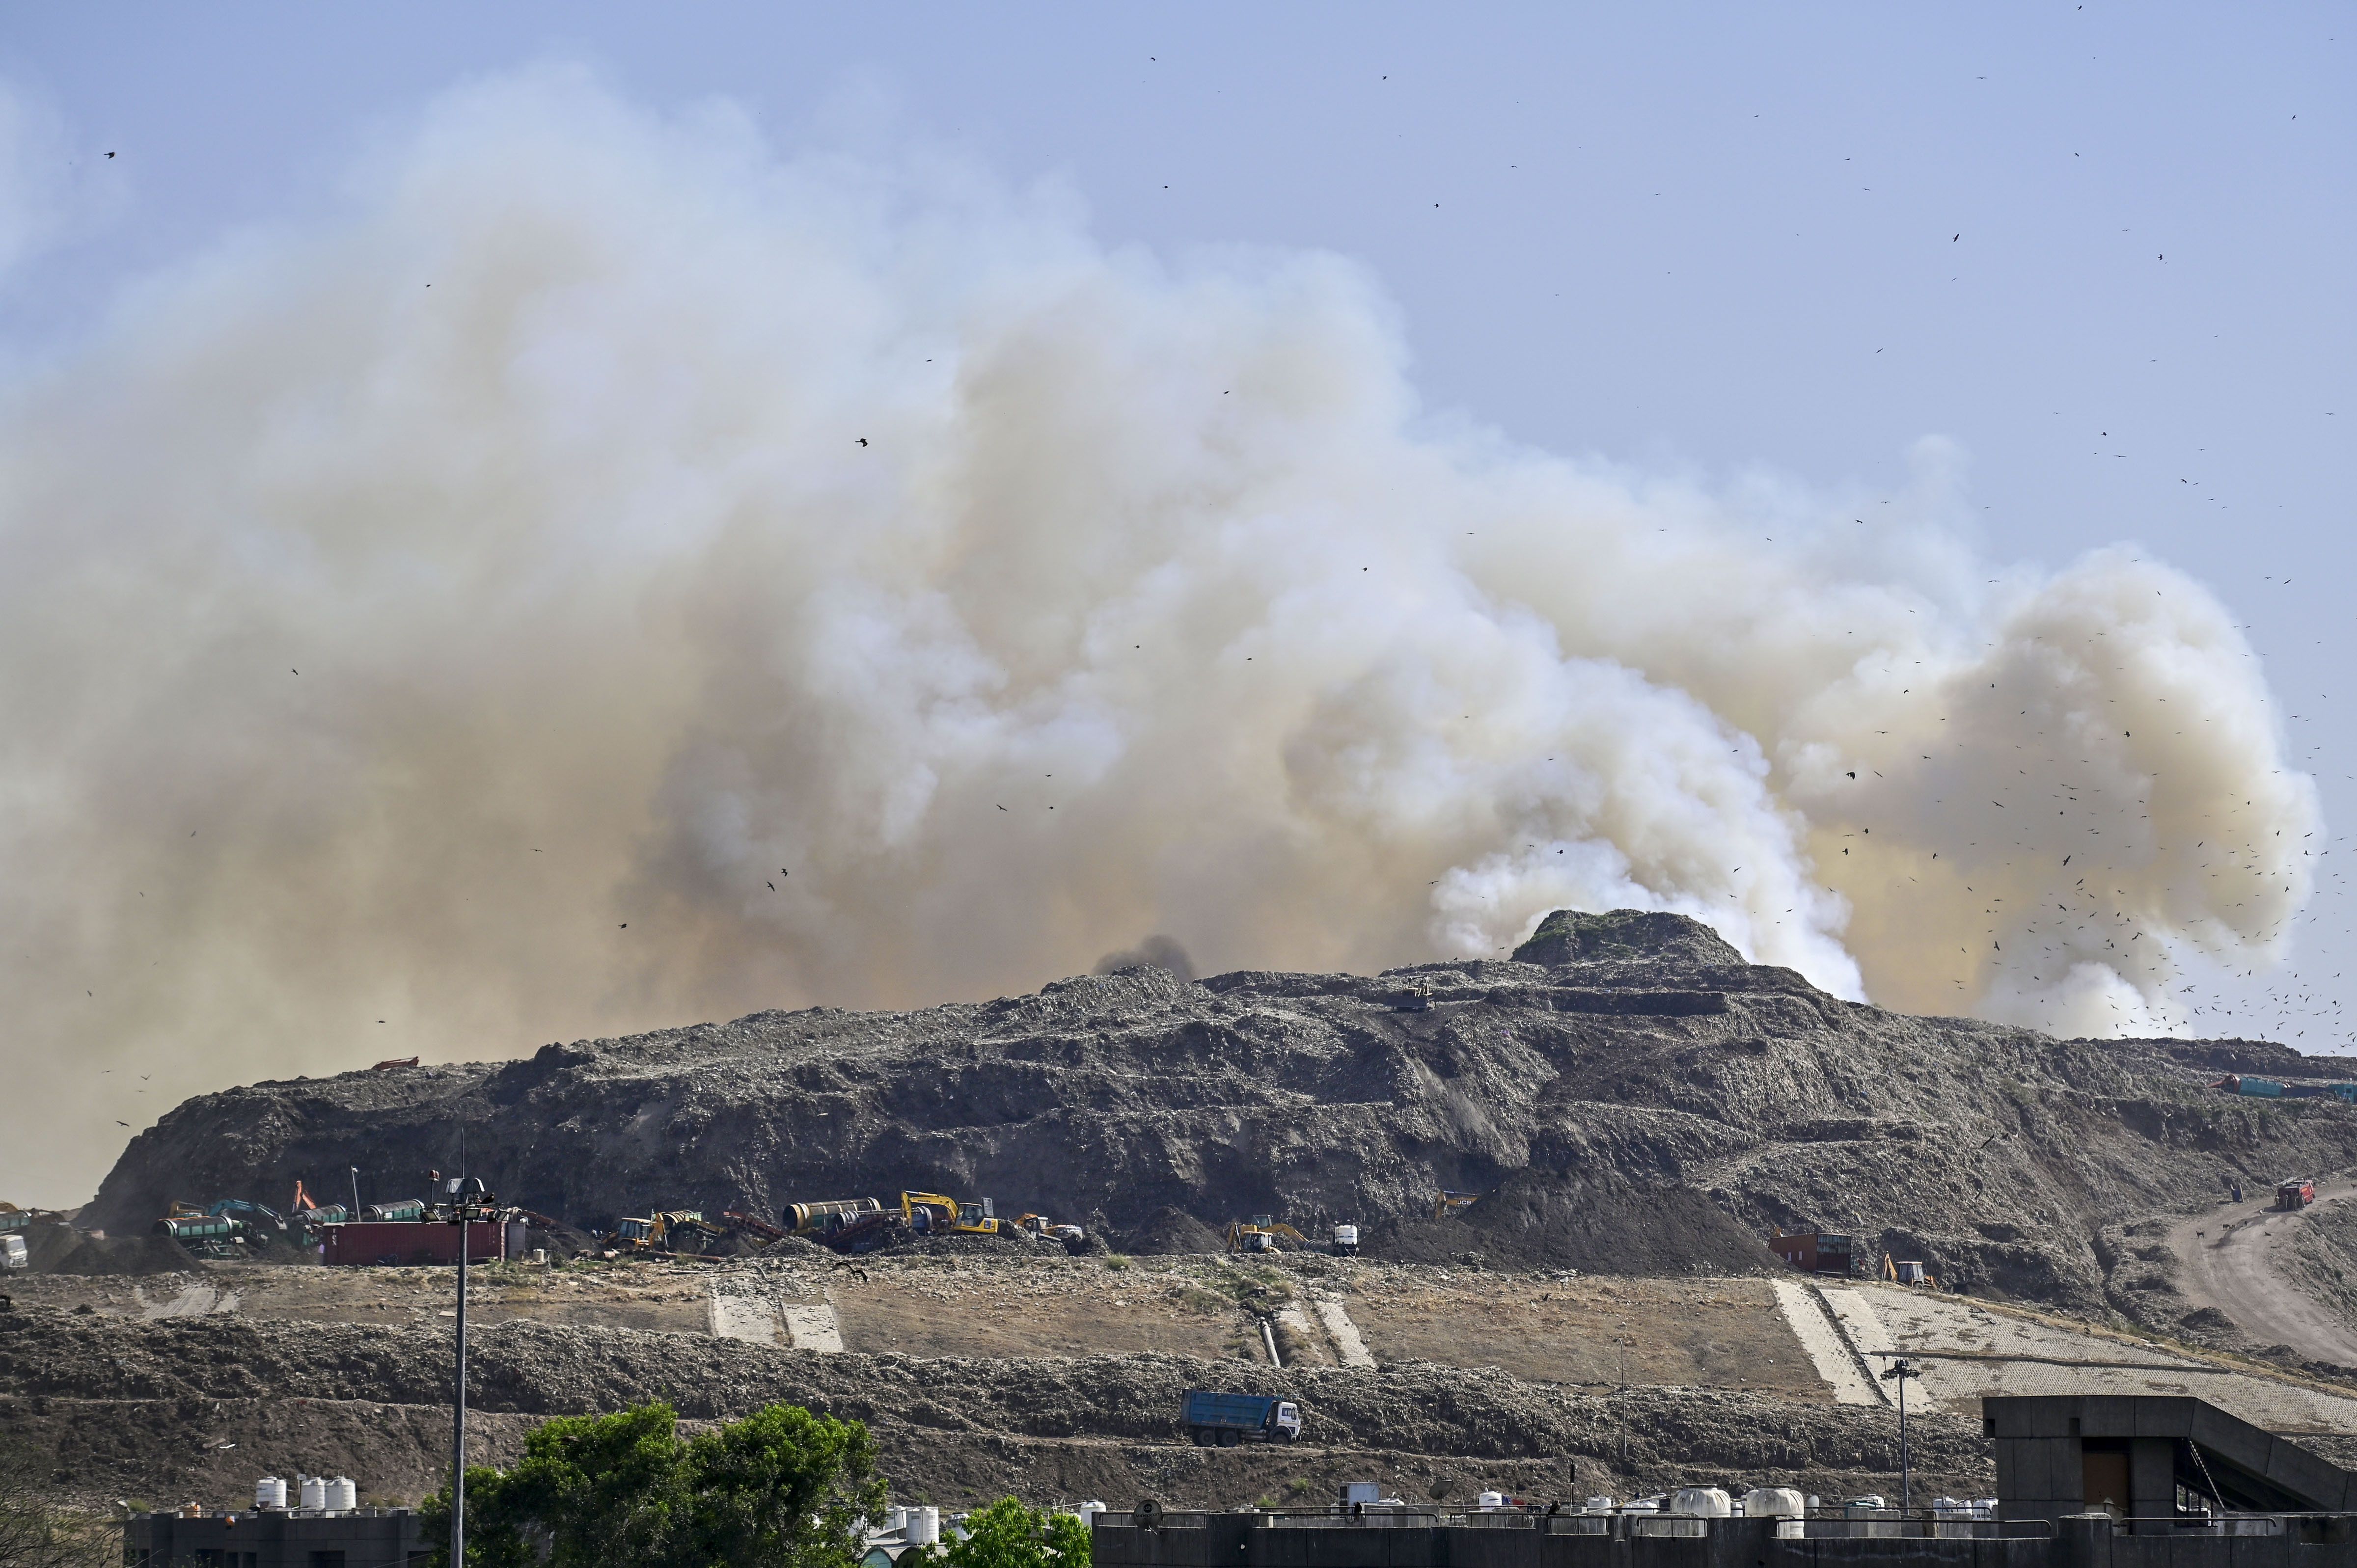 Flames and smoke rise from a fire at Ghazipur Landfill, in New Delhi, Monday, March 28, 2022. (PTI Photo)